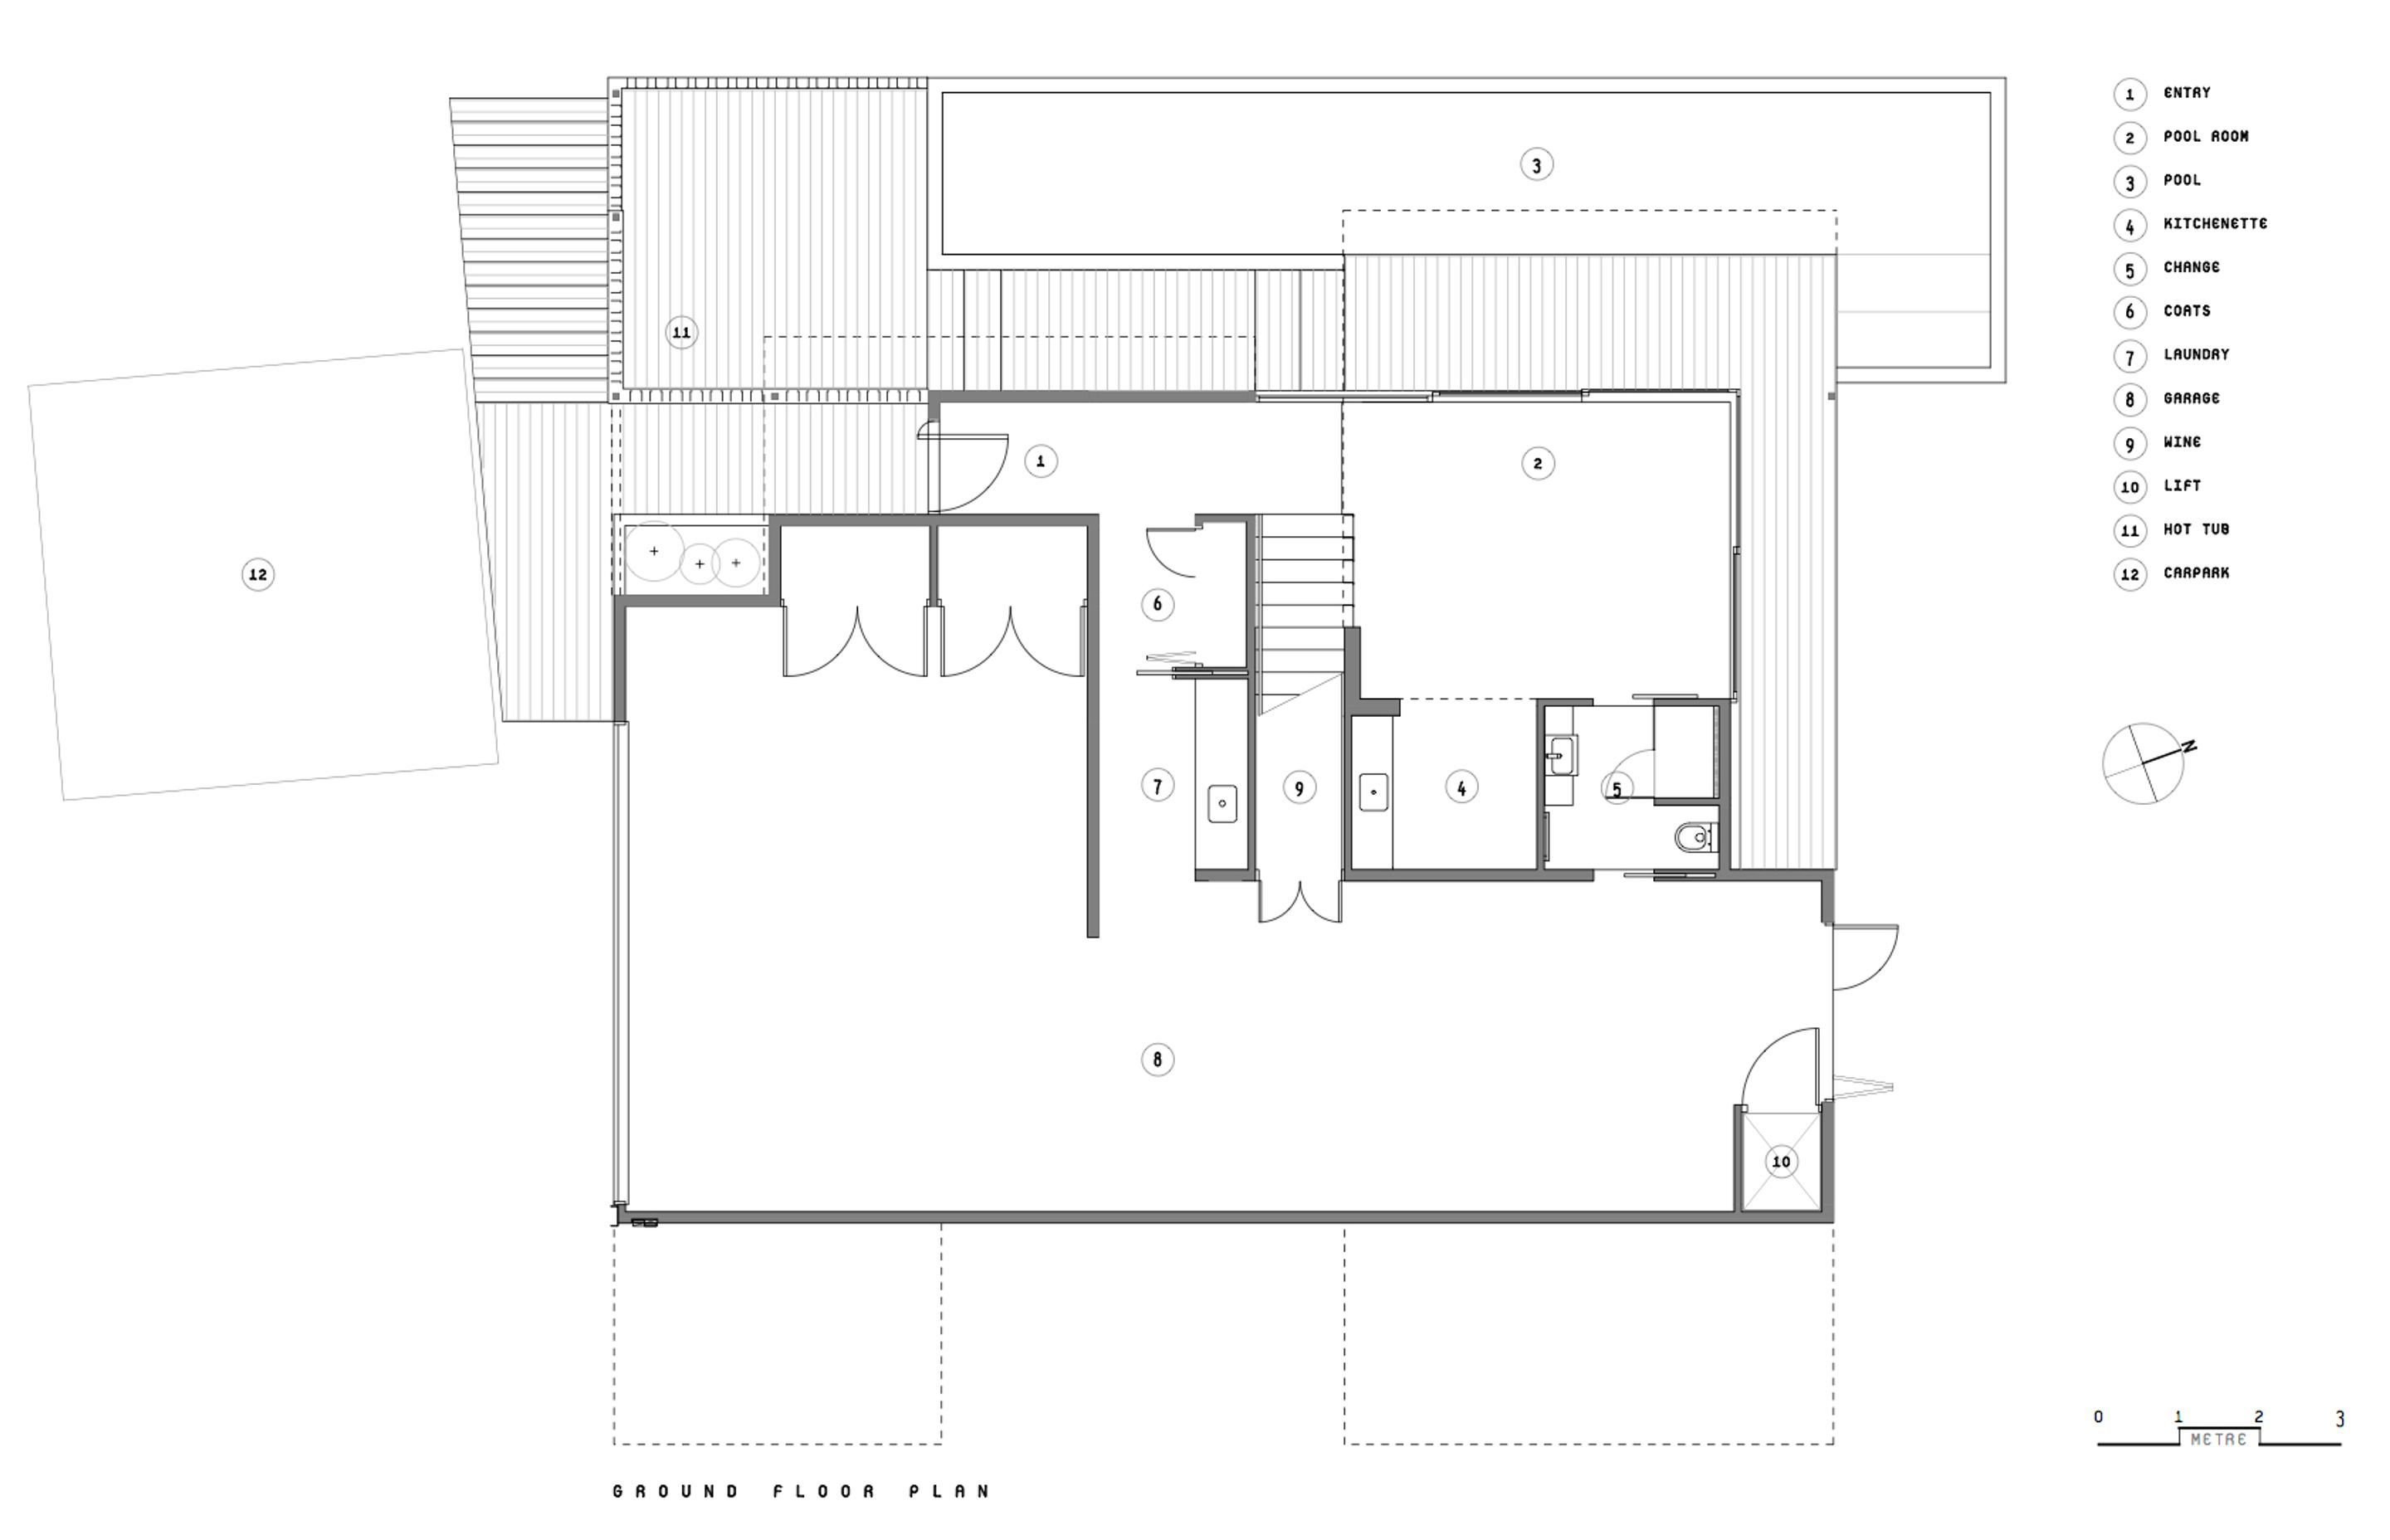 The ground-floor plan by Objects shows the hot tub and lap pool facing northwest.